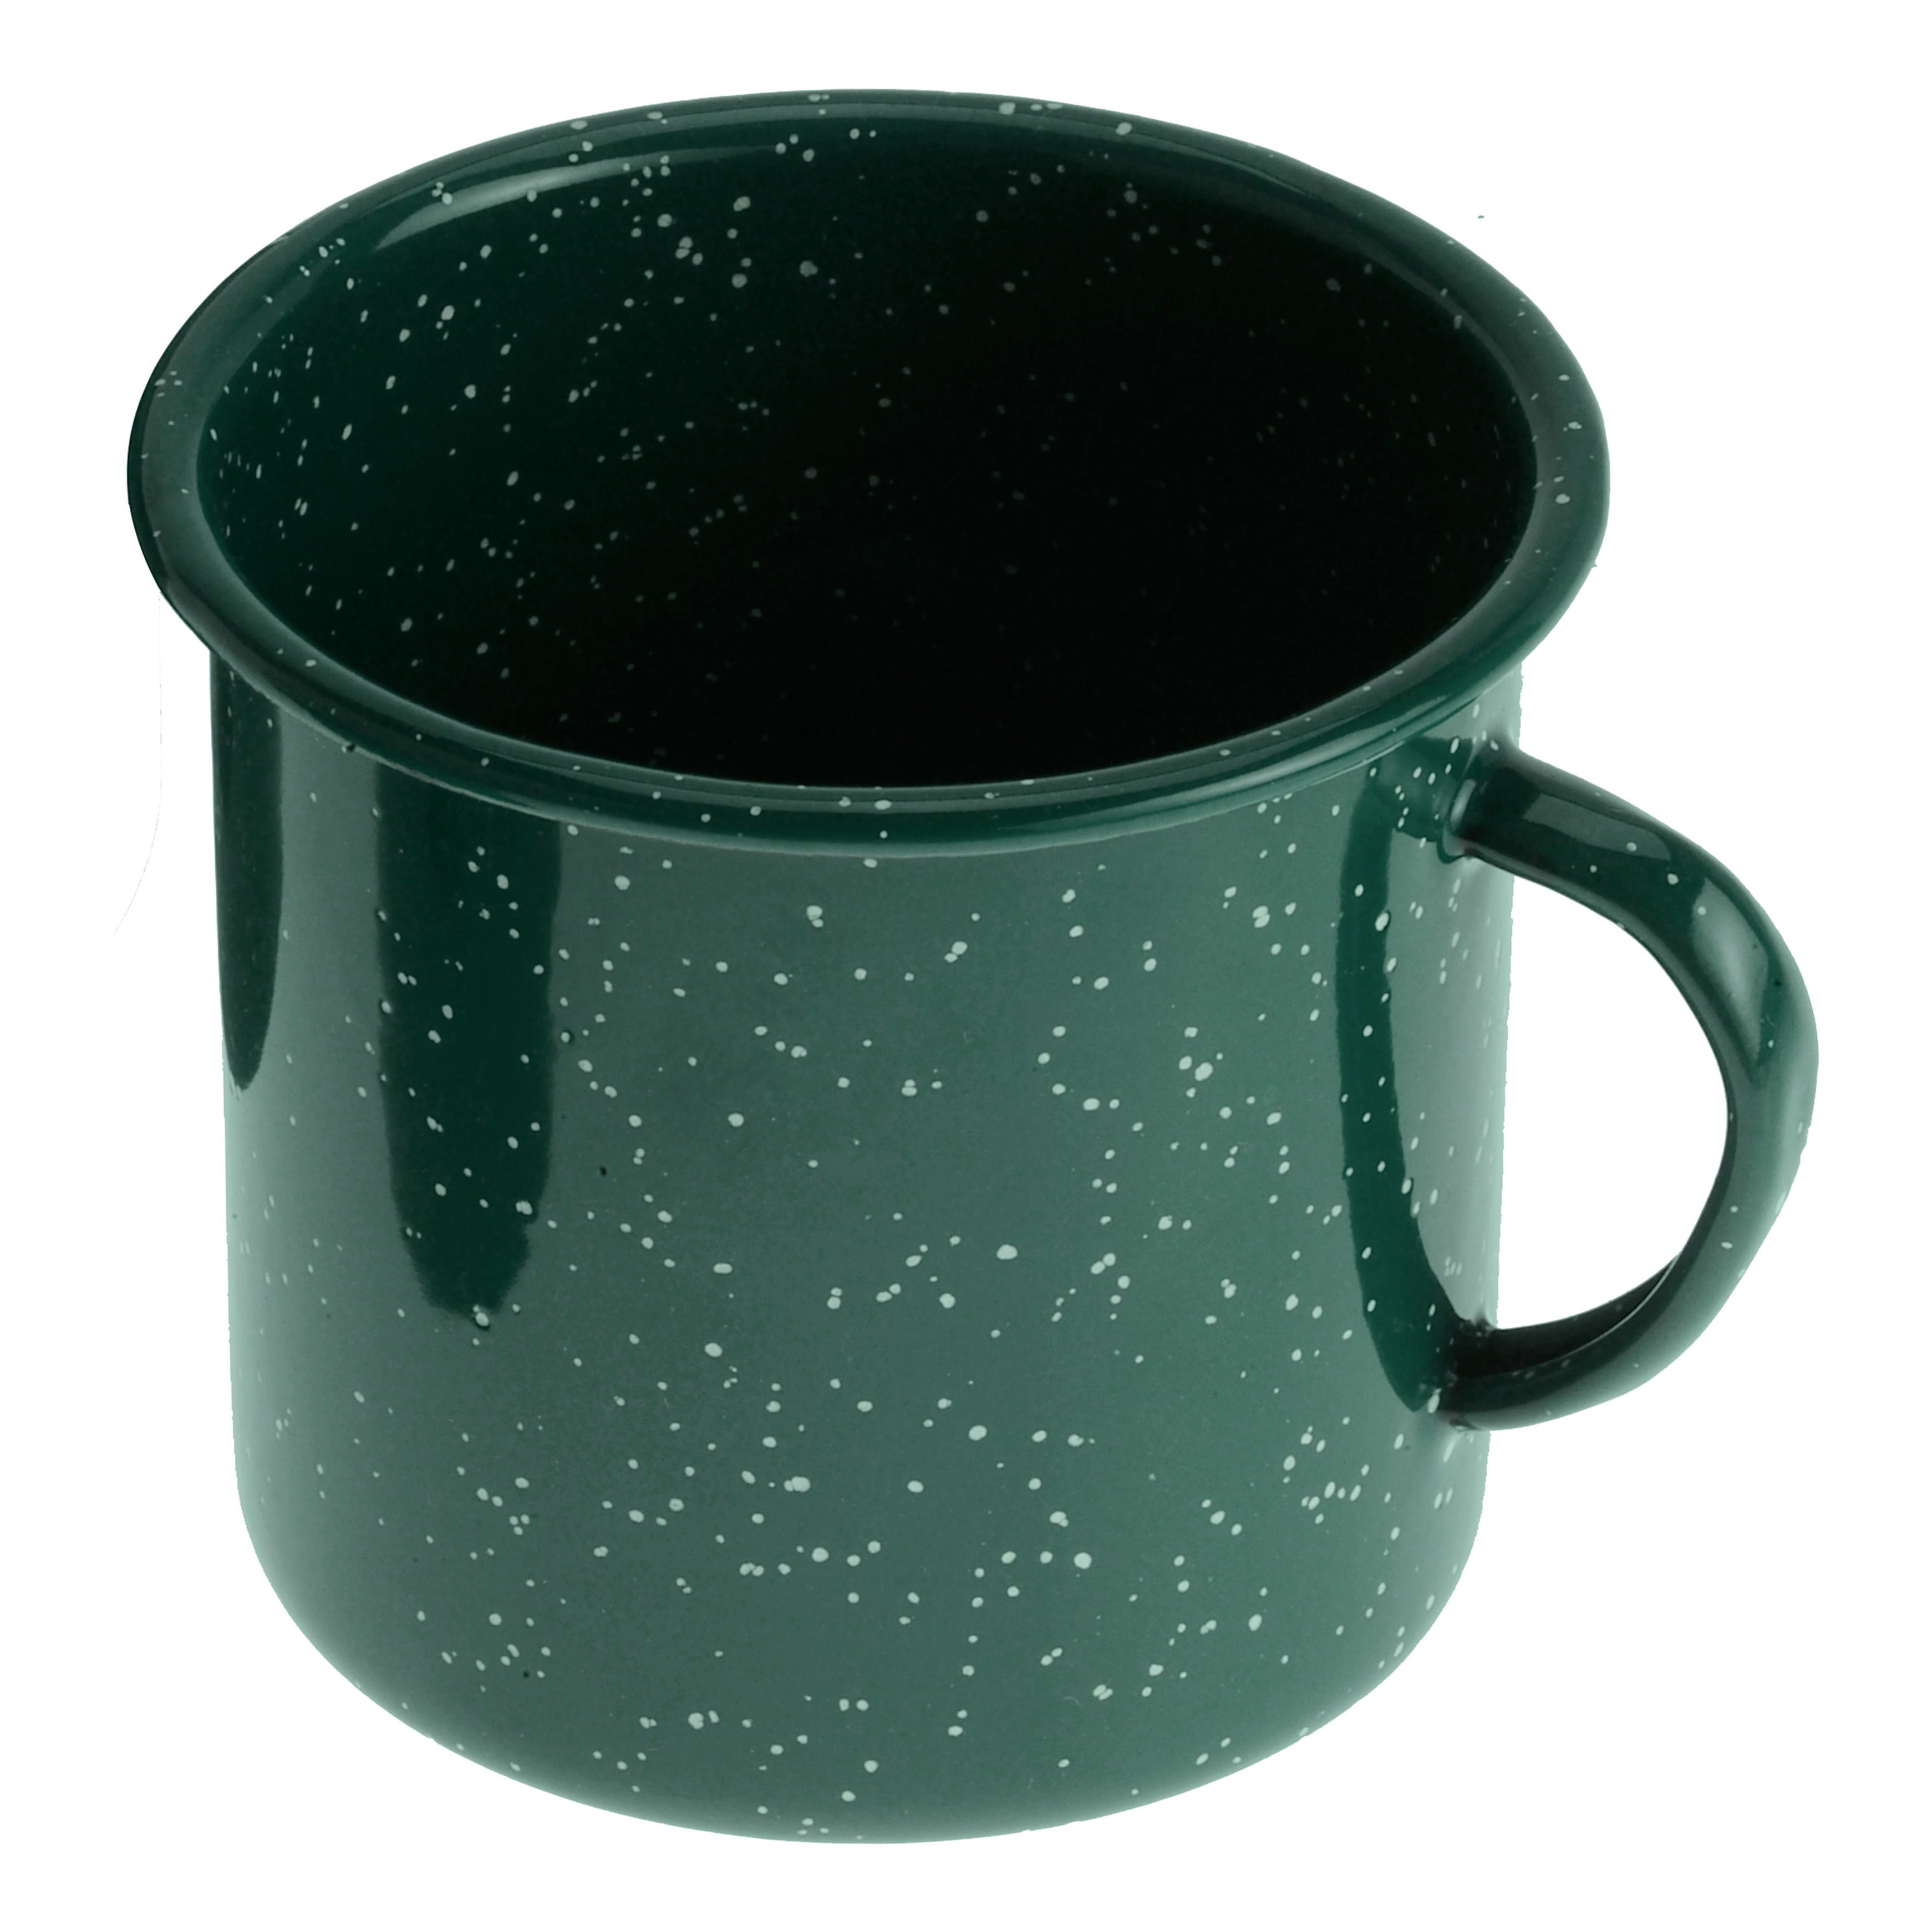 GSI Outdoors Stainless Green Pioneer Enamel Cup - 24 oz.